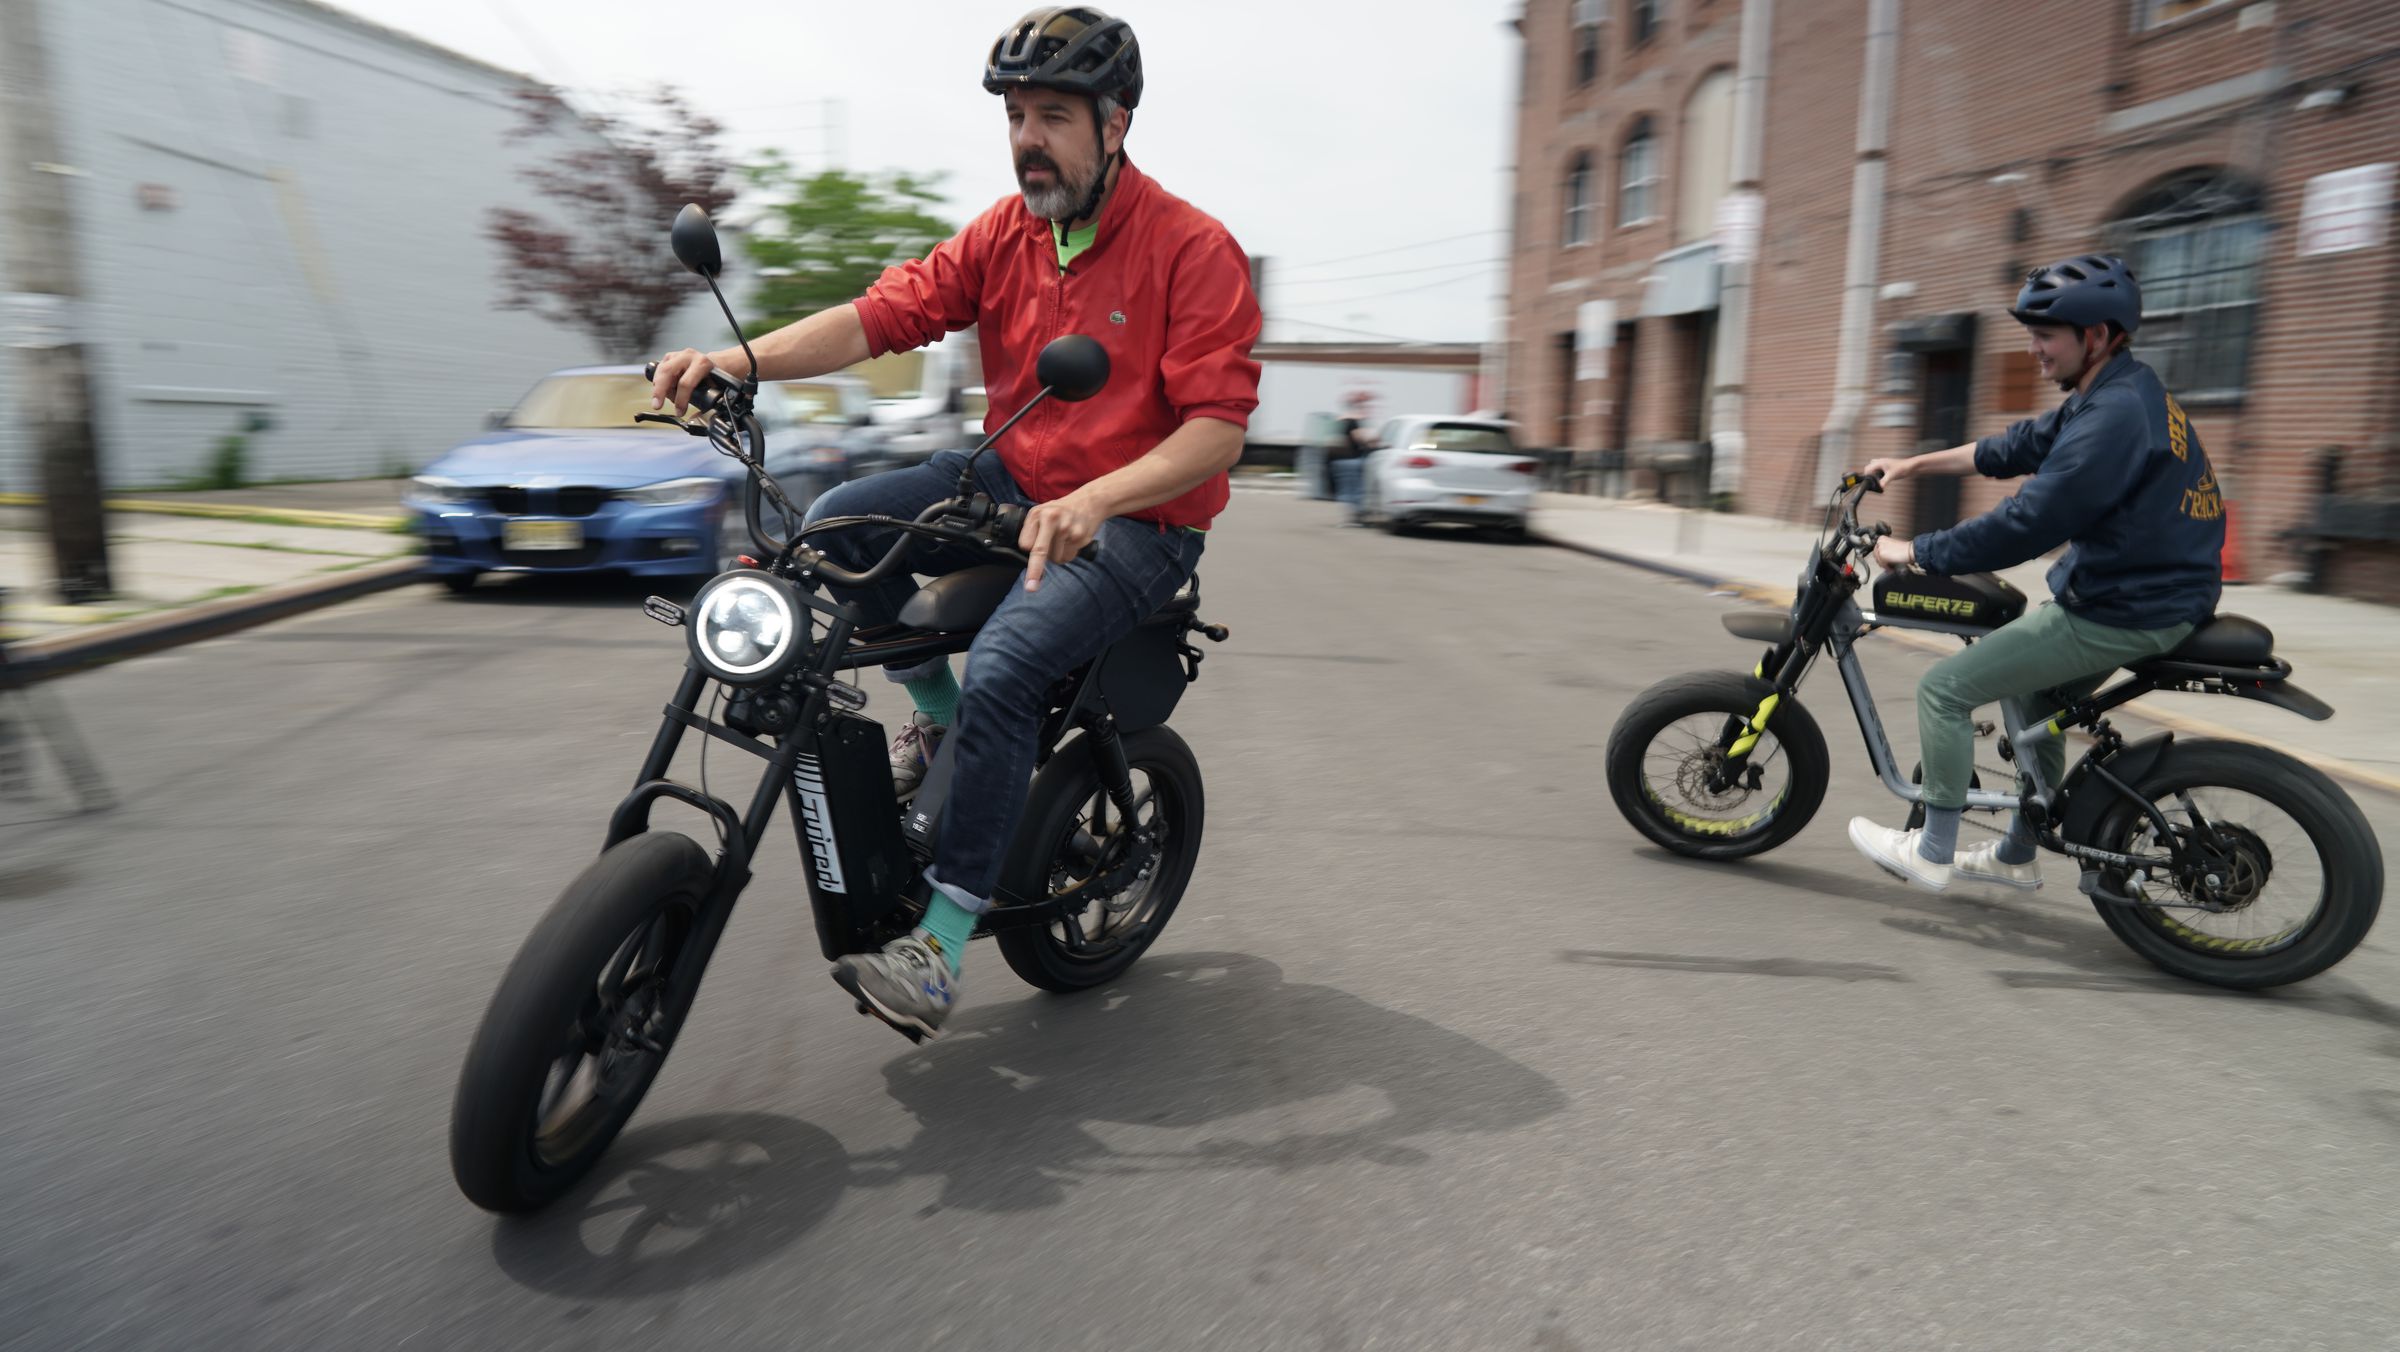 The HyperScrambler 2 is extremely heavy, not exactly affordable, but very fun to ride. 